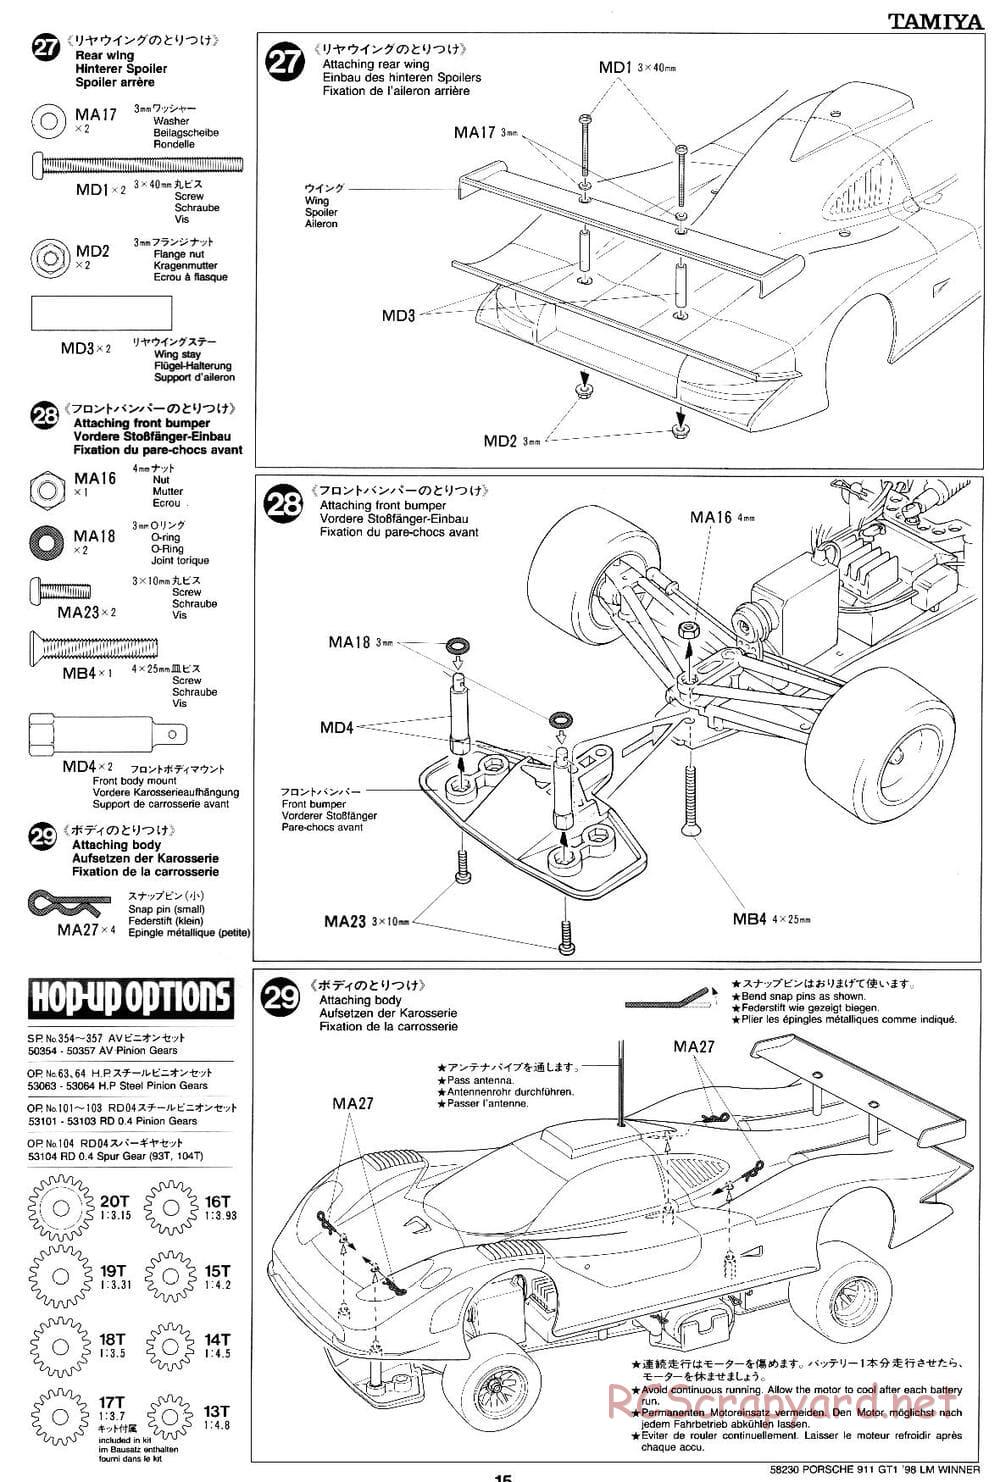 Tamiya - Porsche 911 GT1 98 LM Winner - F103RS Chassis - Manual - Page 15